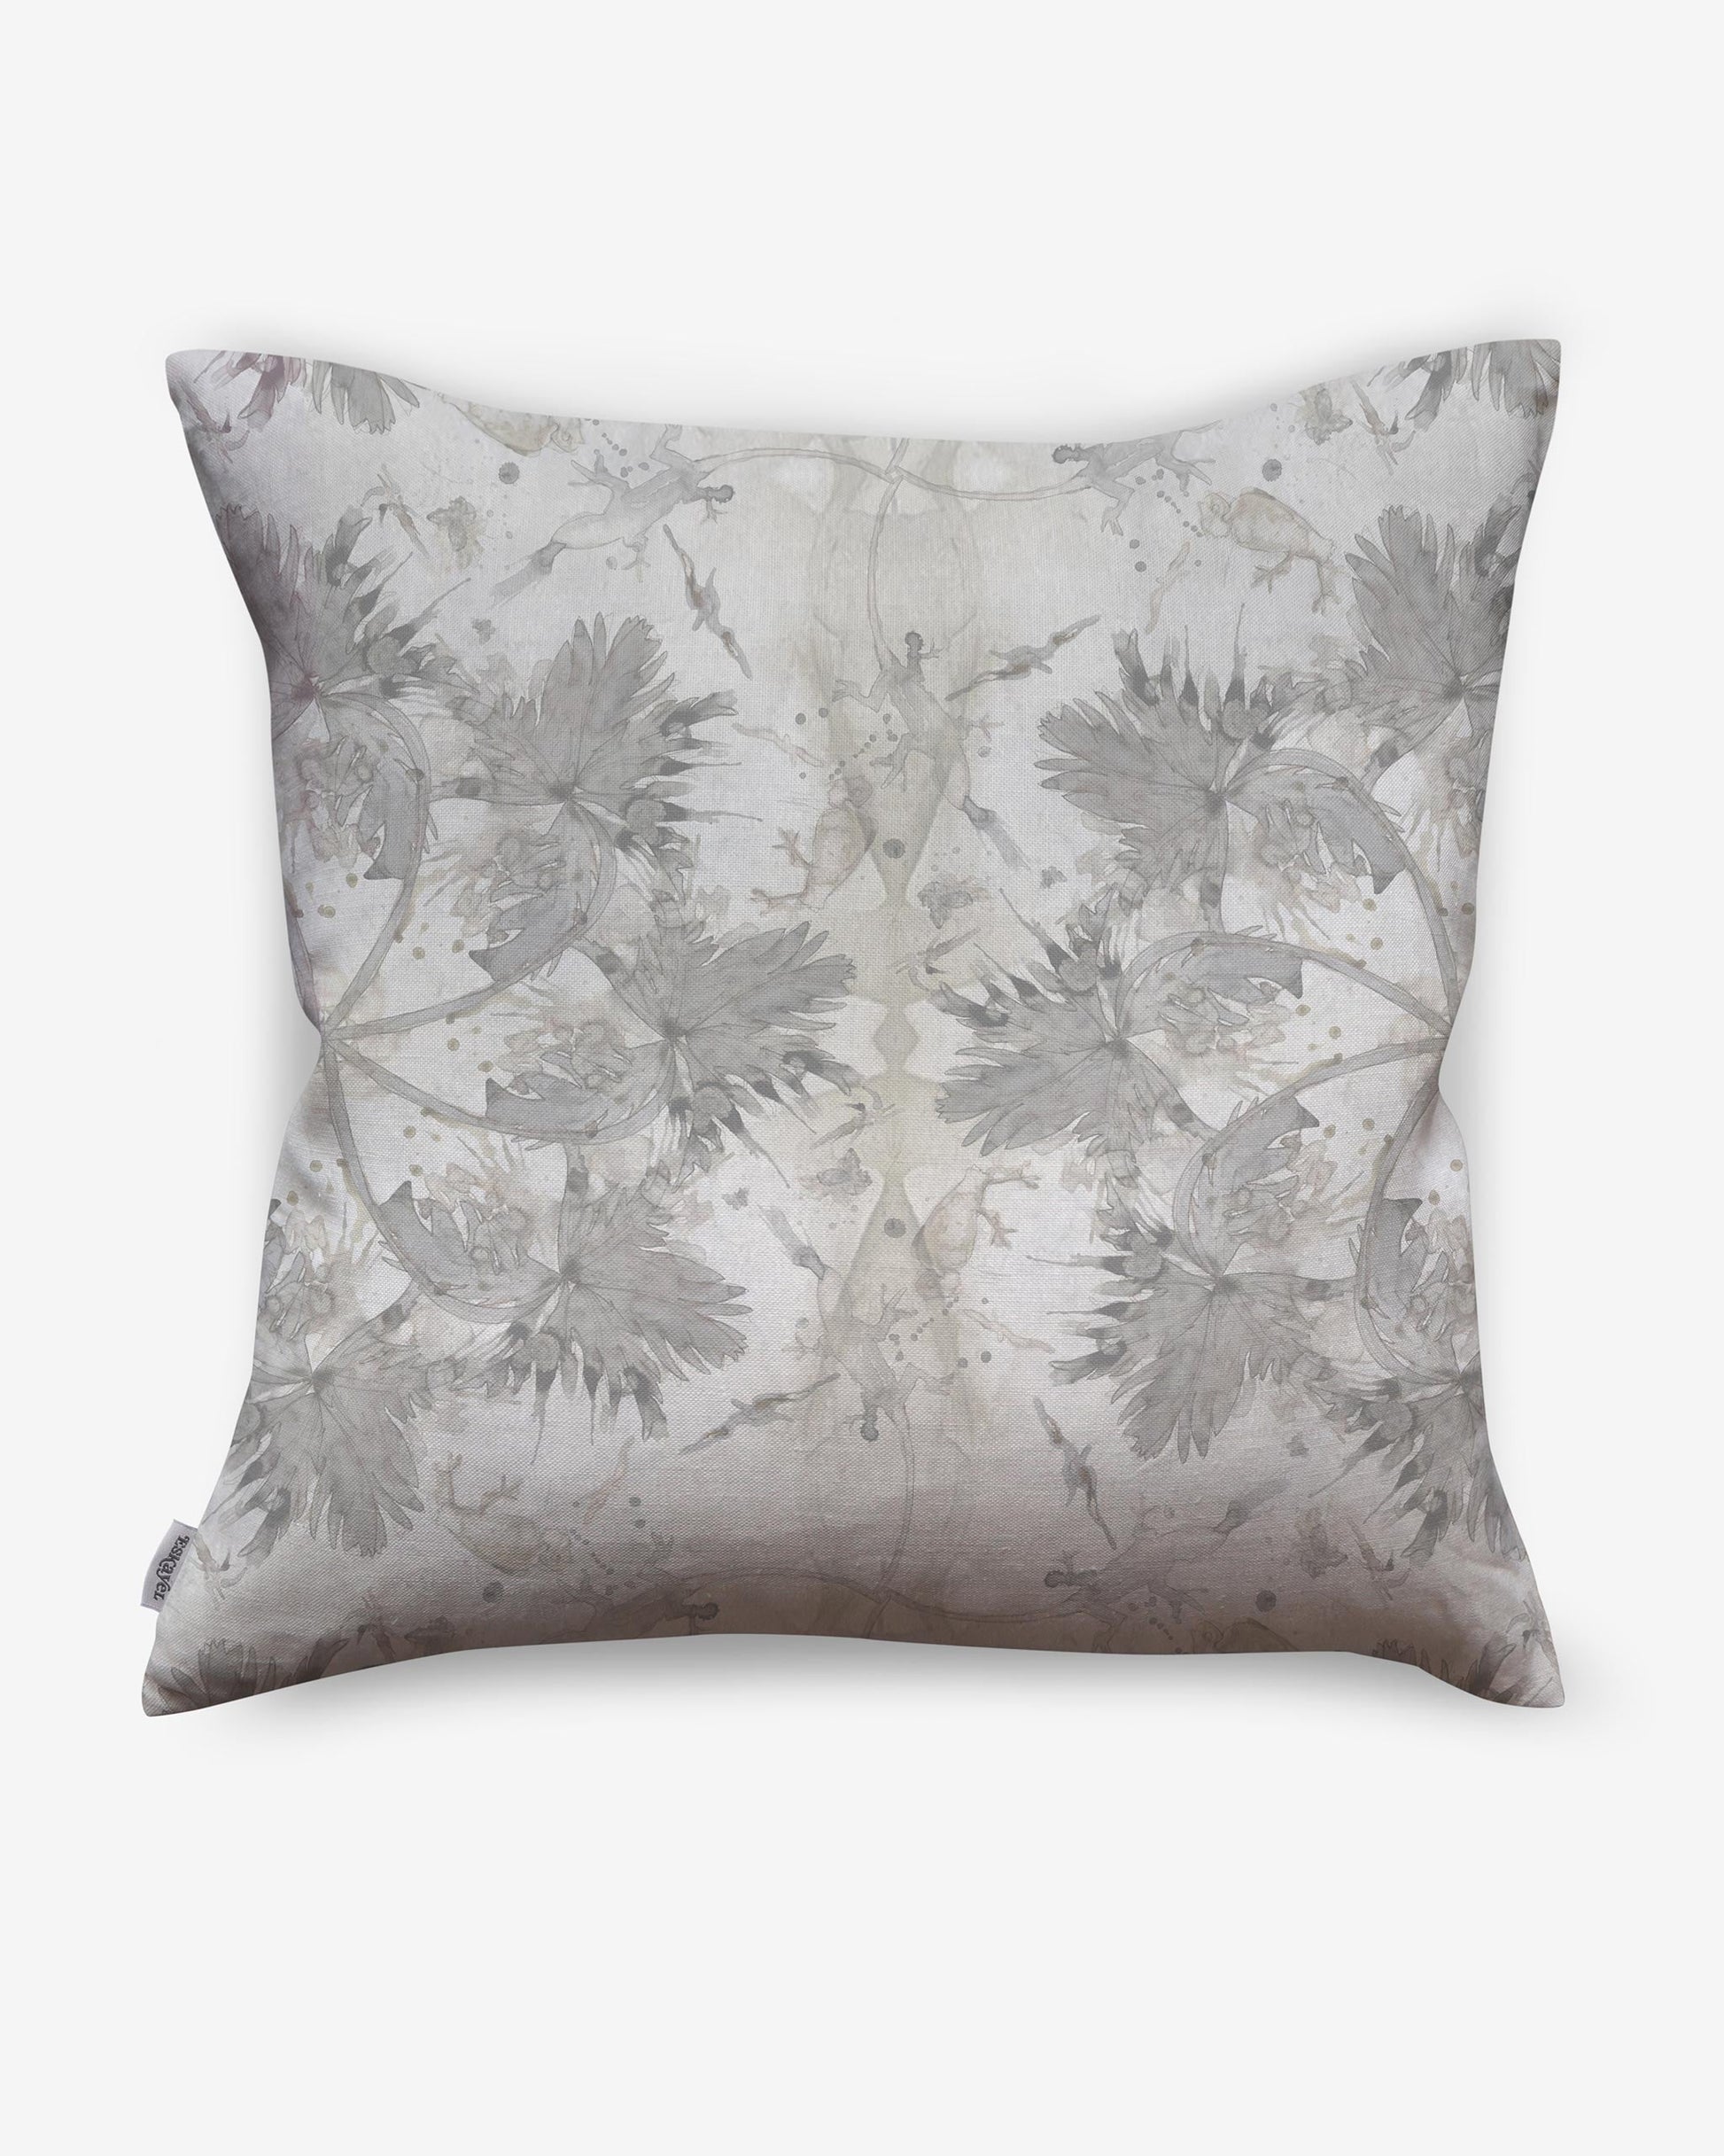 A Laurel Forest Pillow with a luxury fabric and a white and gray design on it, creating a Laurel Forest-inspired tropical atmosphere